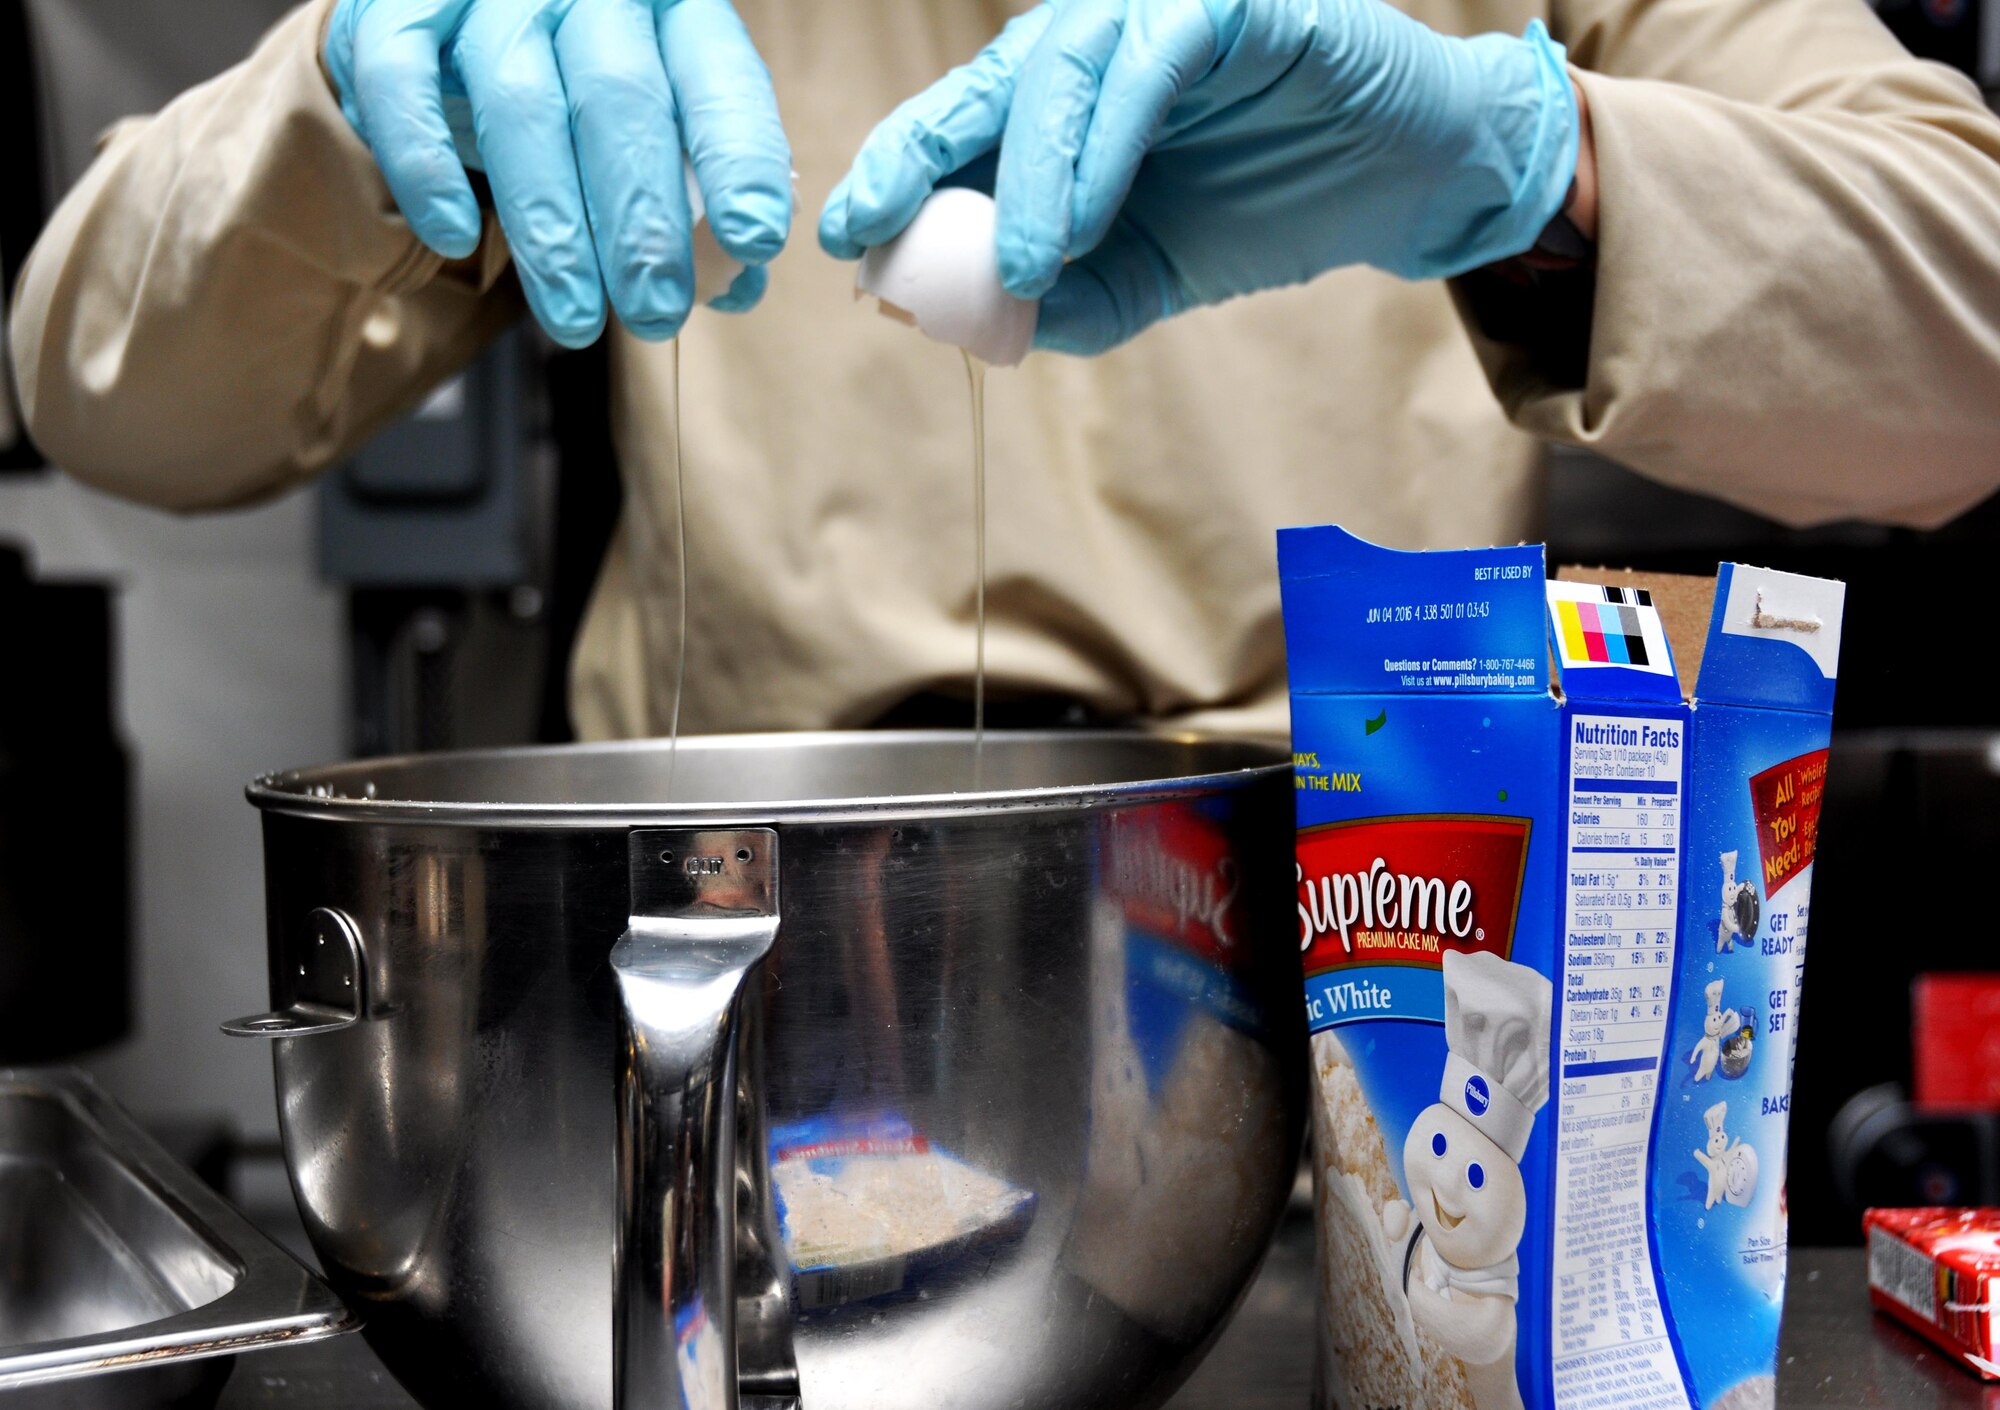 Master Sgt. Nikole Zottola, 911th Force Support Squadron, Pittsburgh, Pa., cracks eggs to make batter for a cake for dessert during the Readiness Challenge for Force Support Silver Flag at Dobbins Air Reserve Base, Georgia, March 11, 2015. About 70 Airmen on teams from Peterson Air Force Base, Colorado; the 445th FSS from Wright-Patterson Air Force Base, Ohio; the 908th FSS from Maxwell AFB, Alabama; the 910th FSS from Youngstown ARB, Ohio; the 911th FSS from Pittsburgh, Pennsylvania; and the 934th FSS from Minneapolis – St. Paul, Minnesota competed in FS Silver Flag. (U.S. Air Force photo/Senior Airman Daniel Phelps)